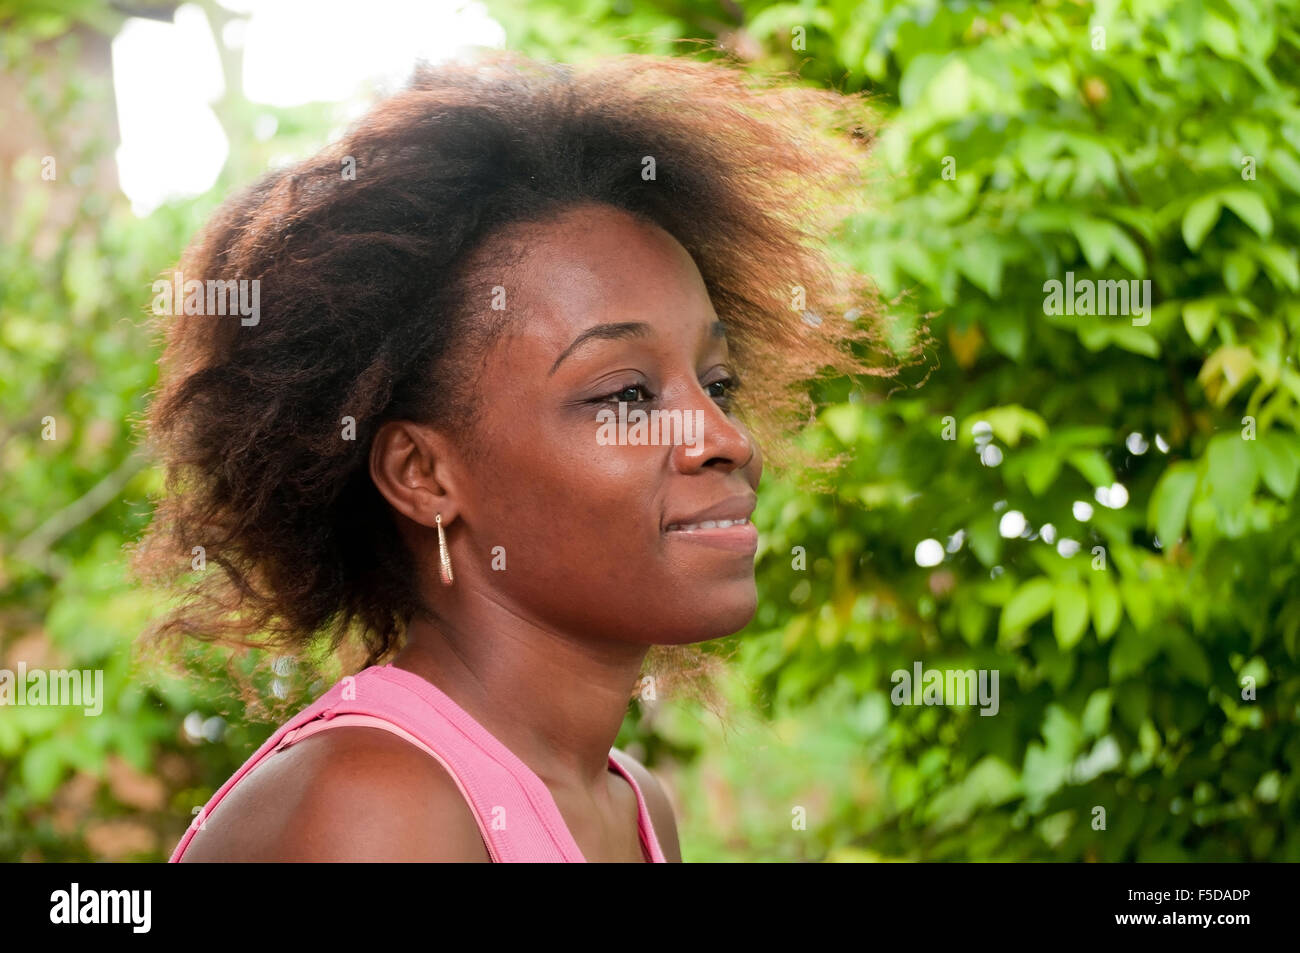 Pretty lady with frizzy hair smiling. Stock Photo